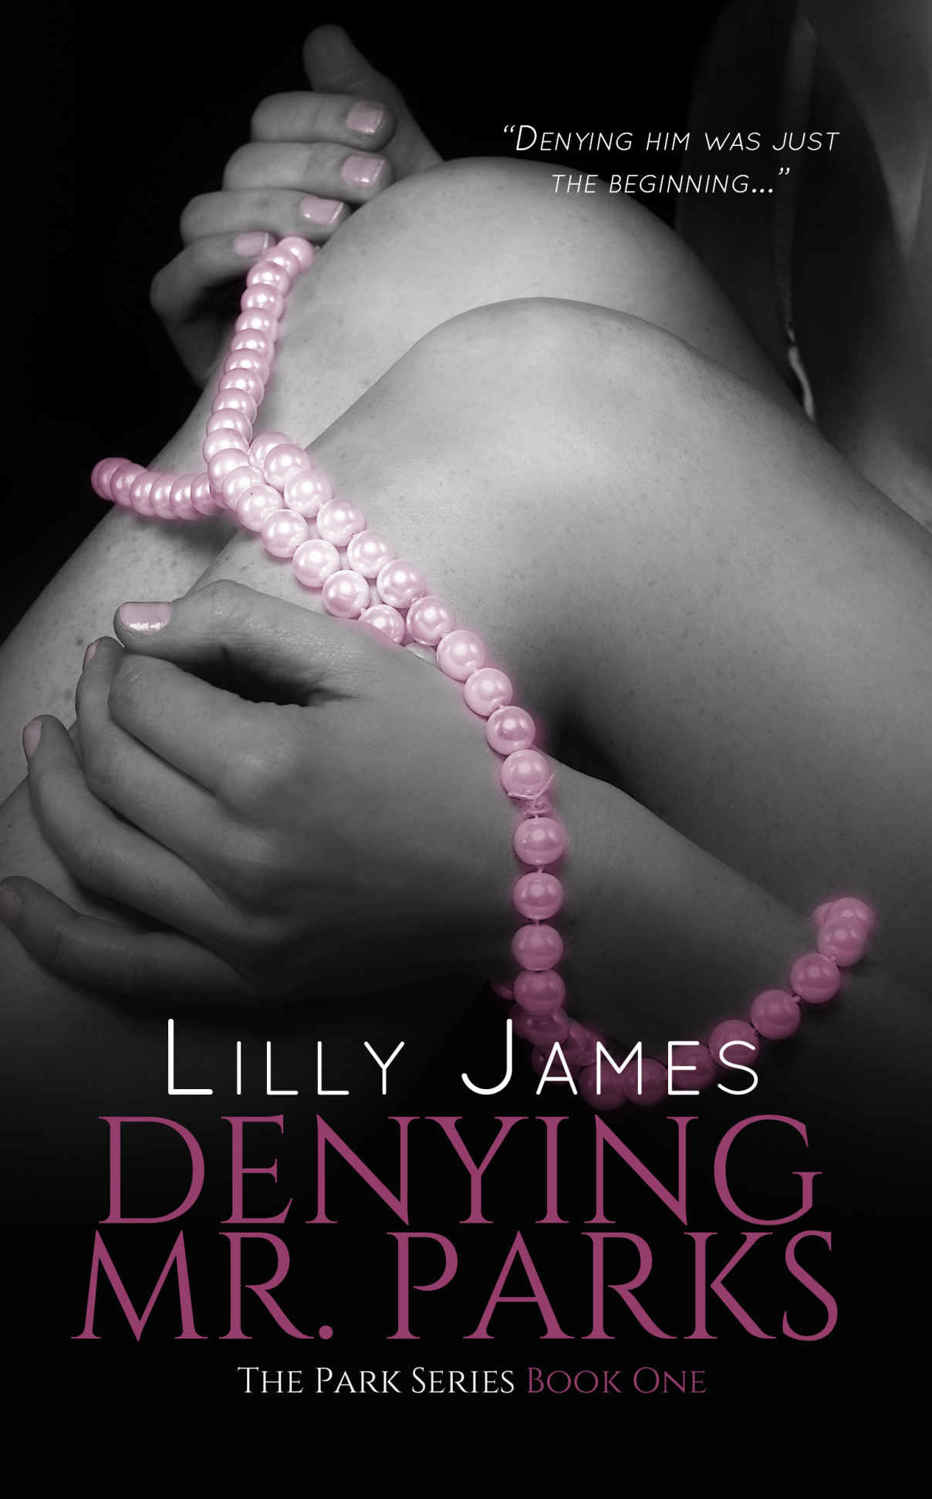 Denying Mr. Parks (The Parks #1) by Lilly James